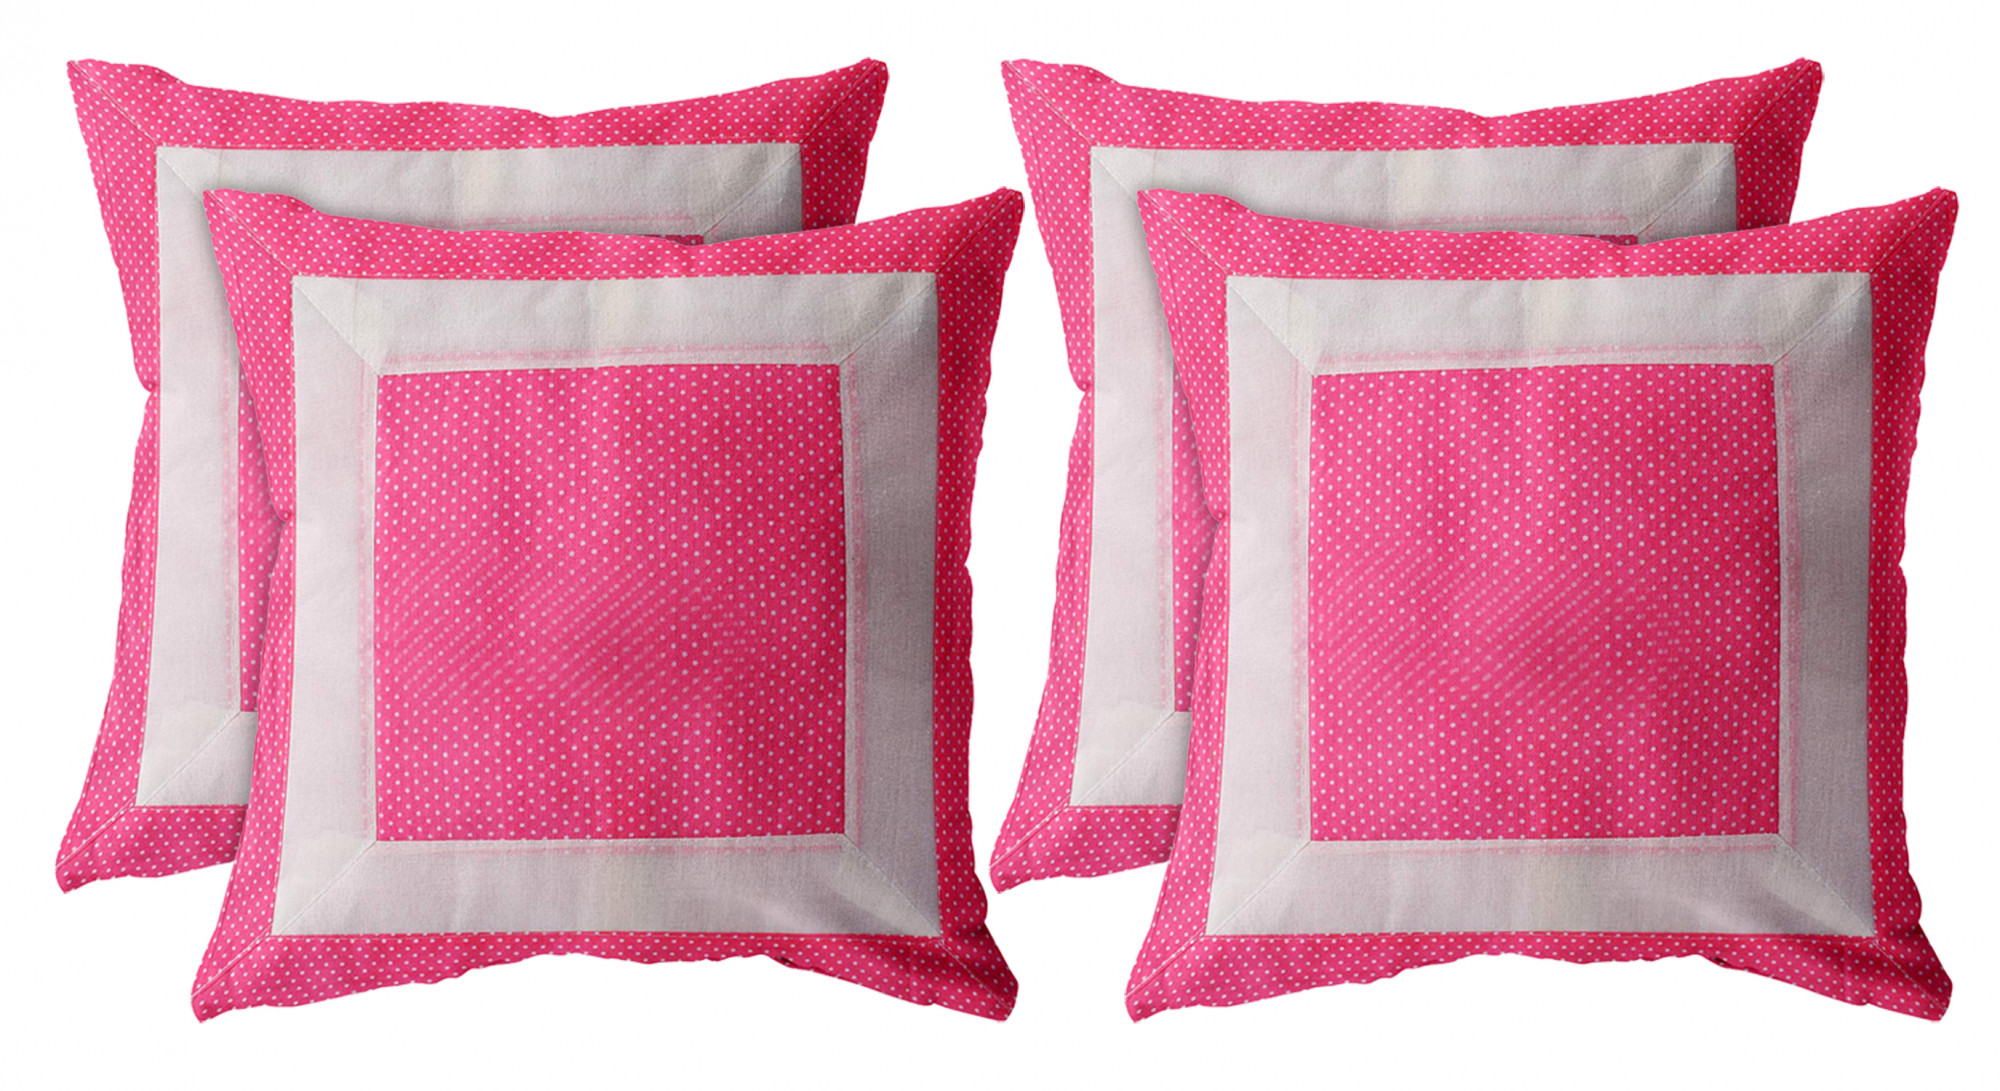 Kuber Industries Dot Printed Cotton Comfortable Decorative Throw Pillow Case Square Cushion Cover Pillowcas 16x16 Inches,(Pink)